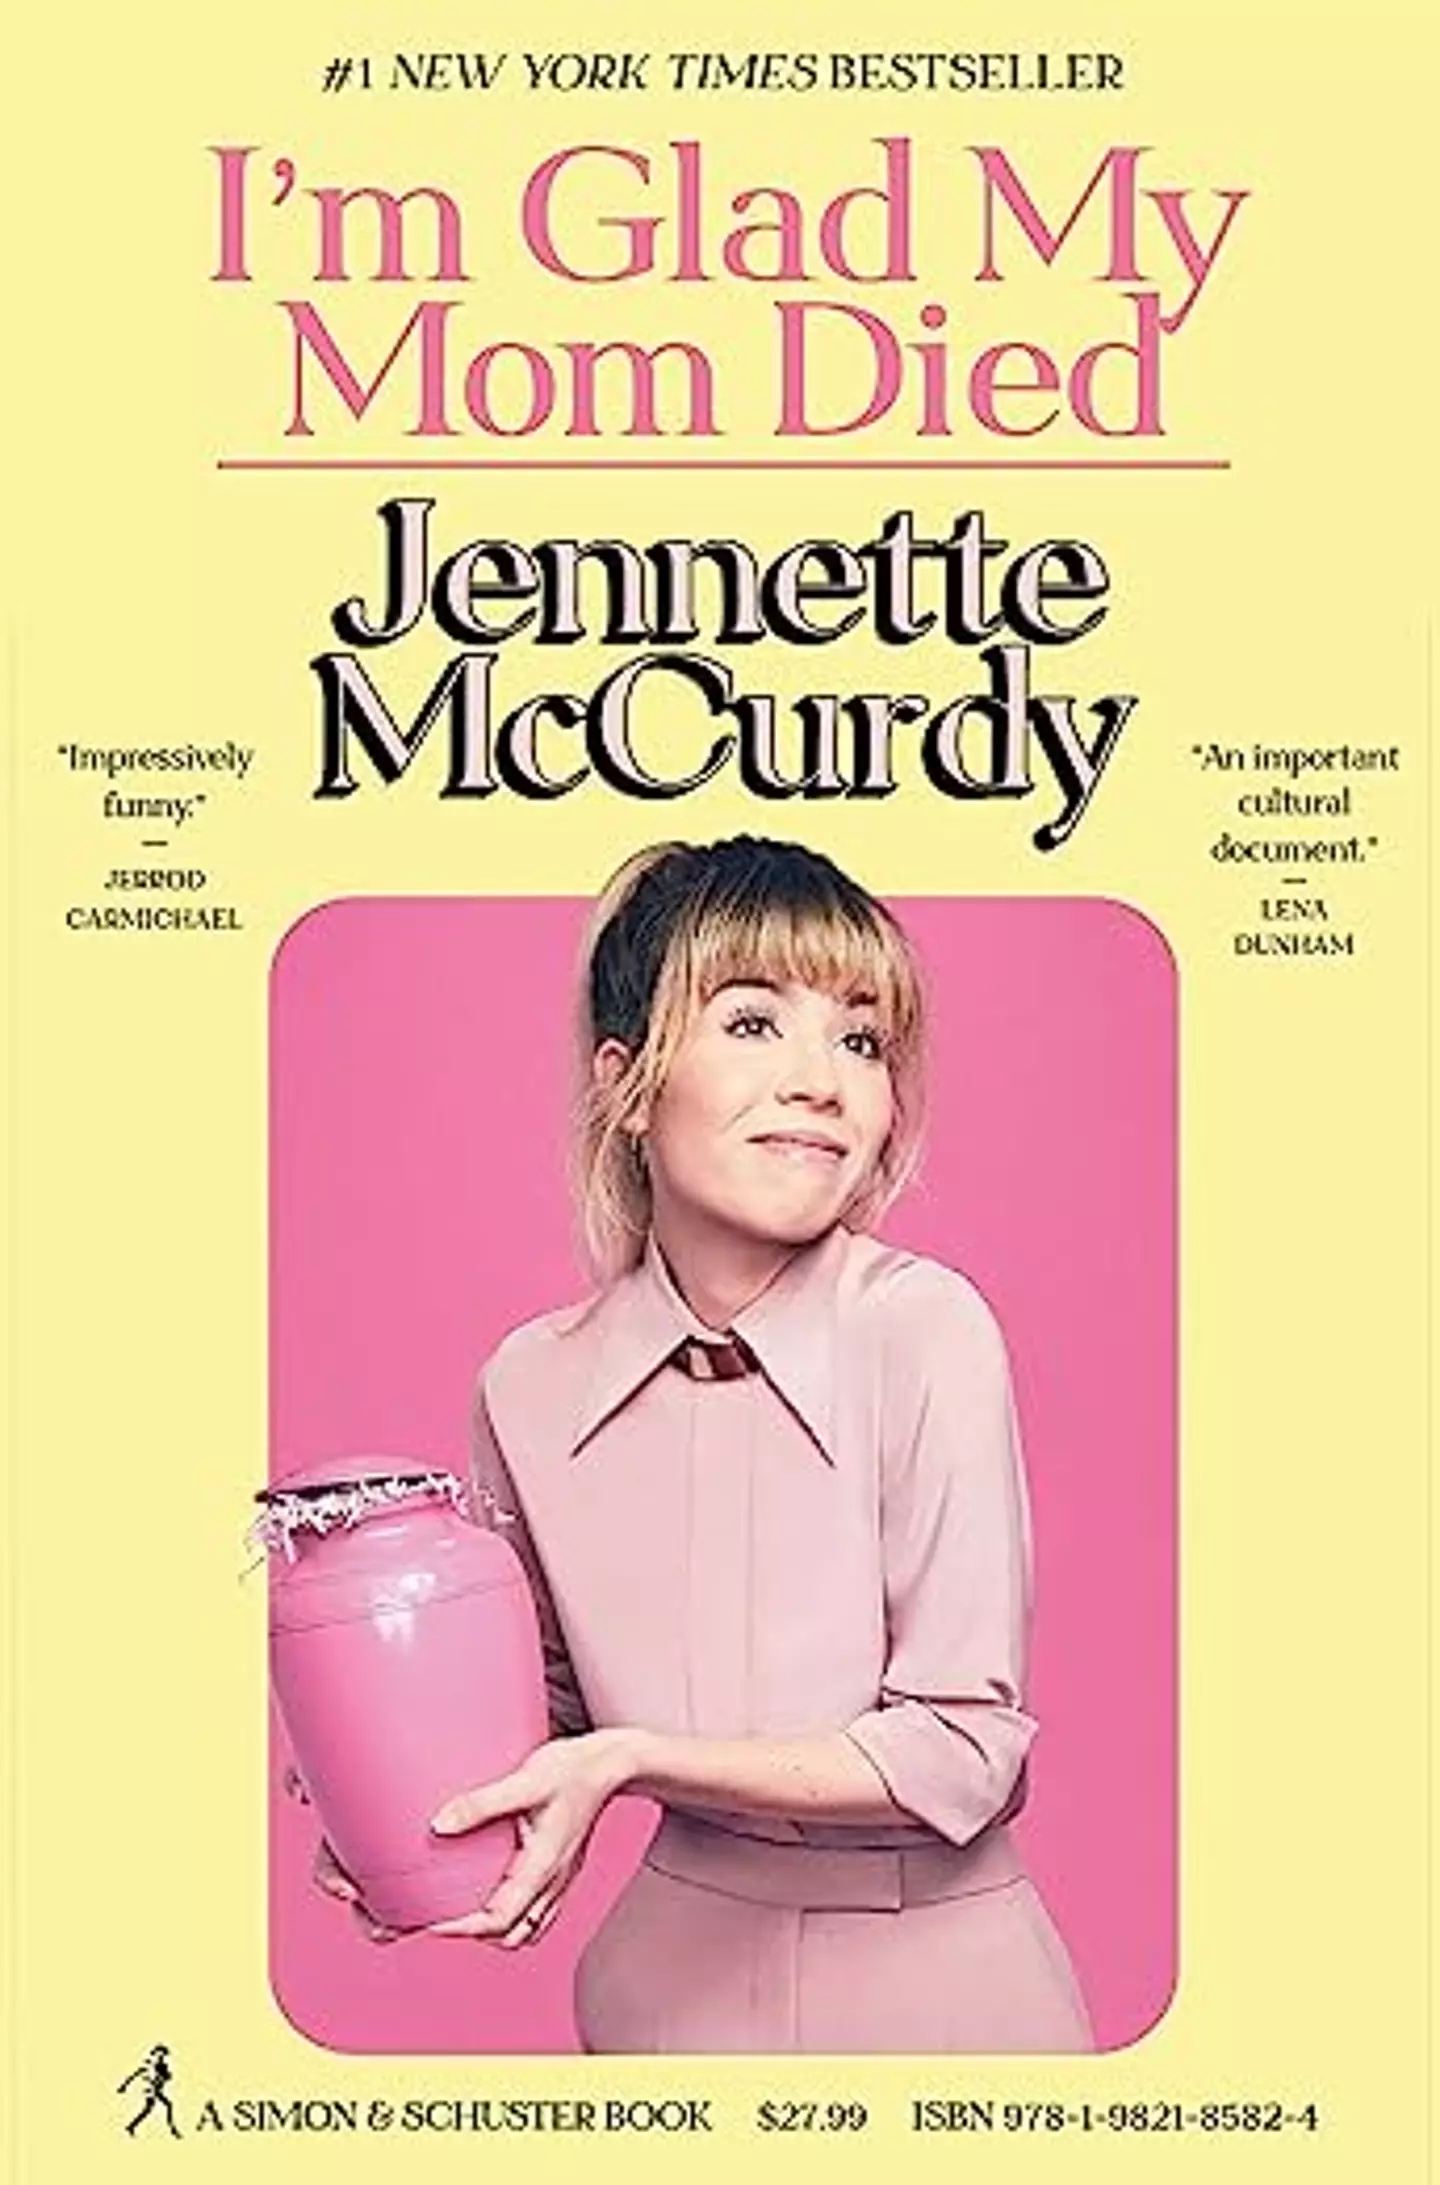 Jennette McCurdy spoke about her childhood in her acclaimed memoir 'I'm a Glad My Mom Died'.